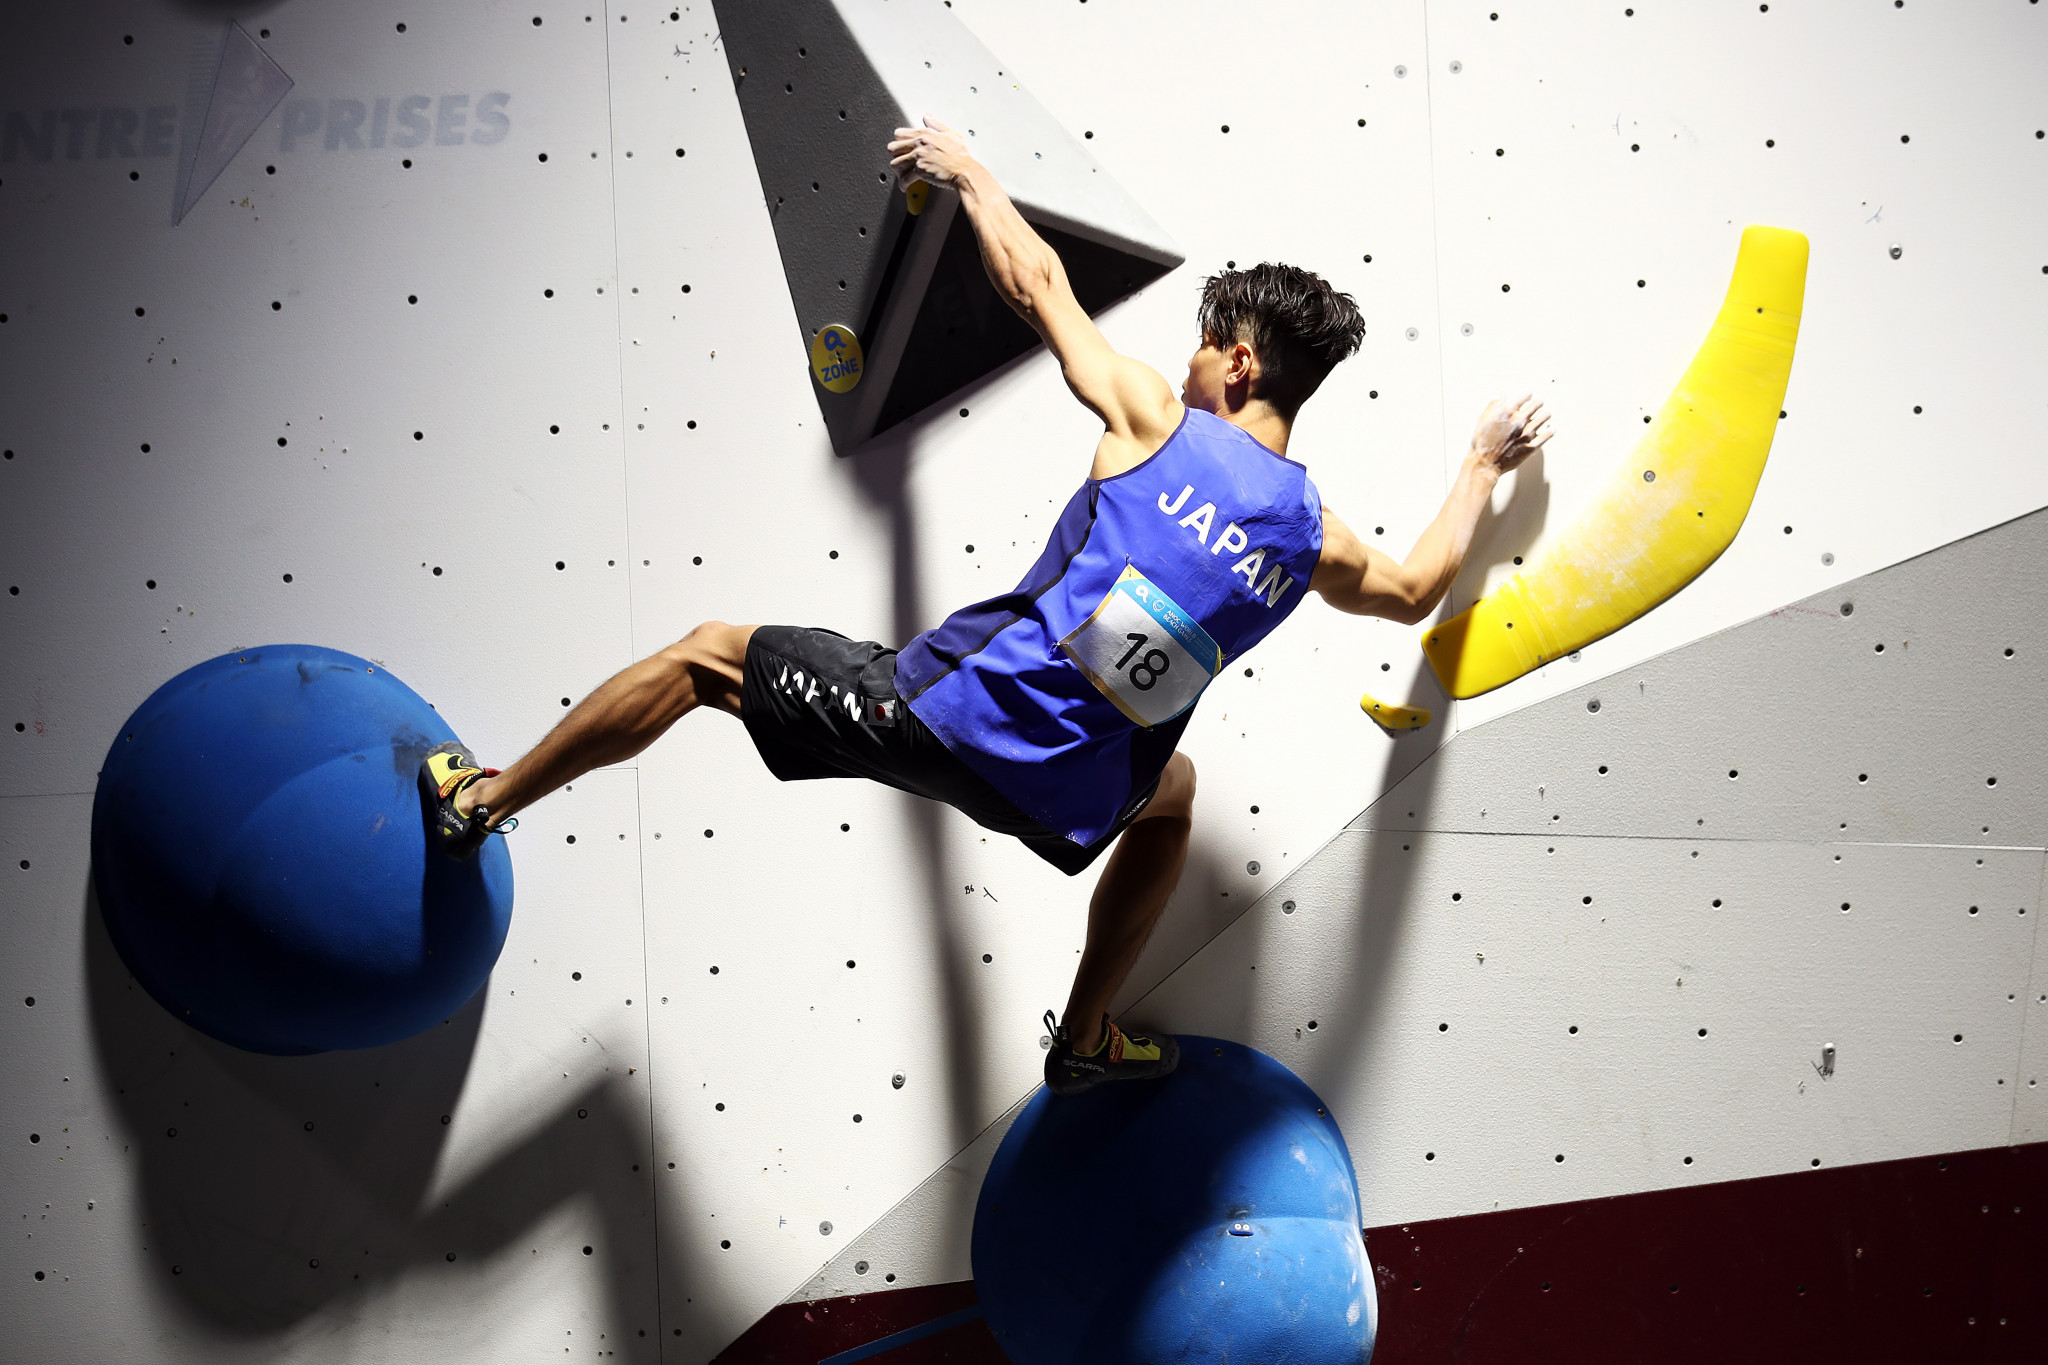 Olympic qualifying points up for grabs in final IFSC Lead Climbing World Cup